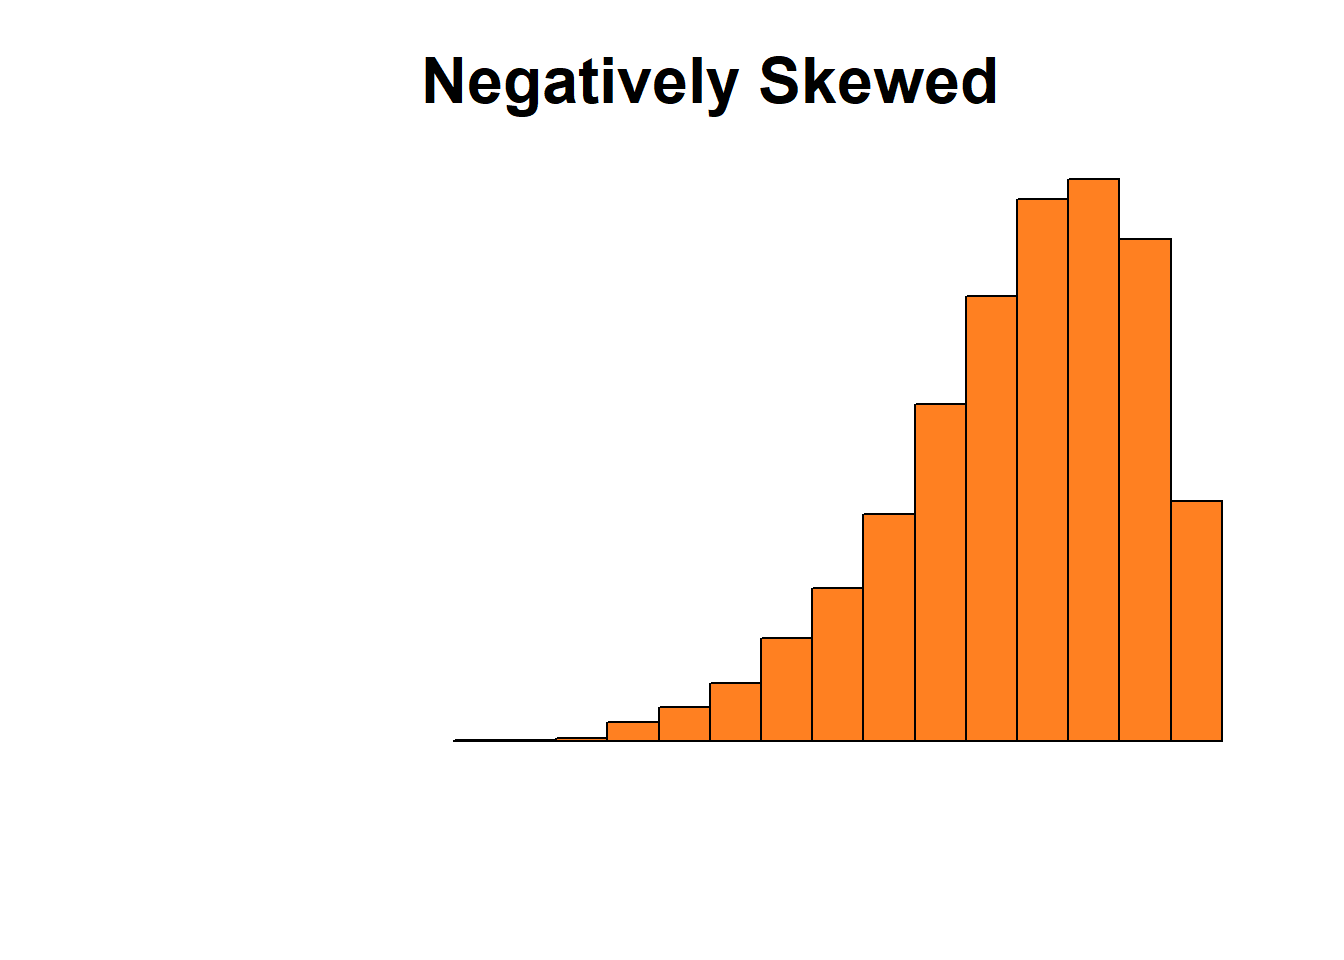 Histograms showing negatively skewed, symmetrical, and positively skewed distributions.